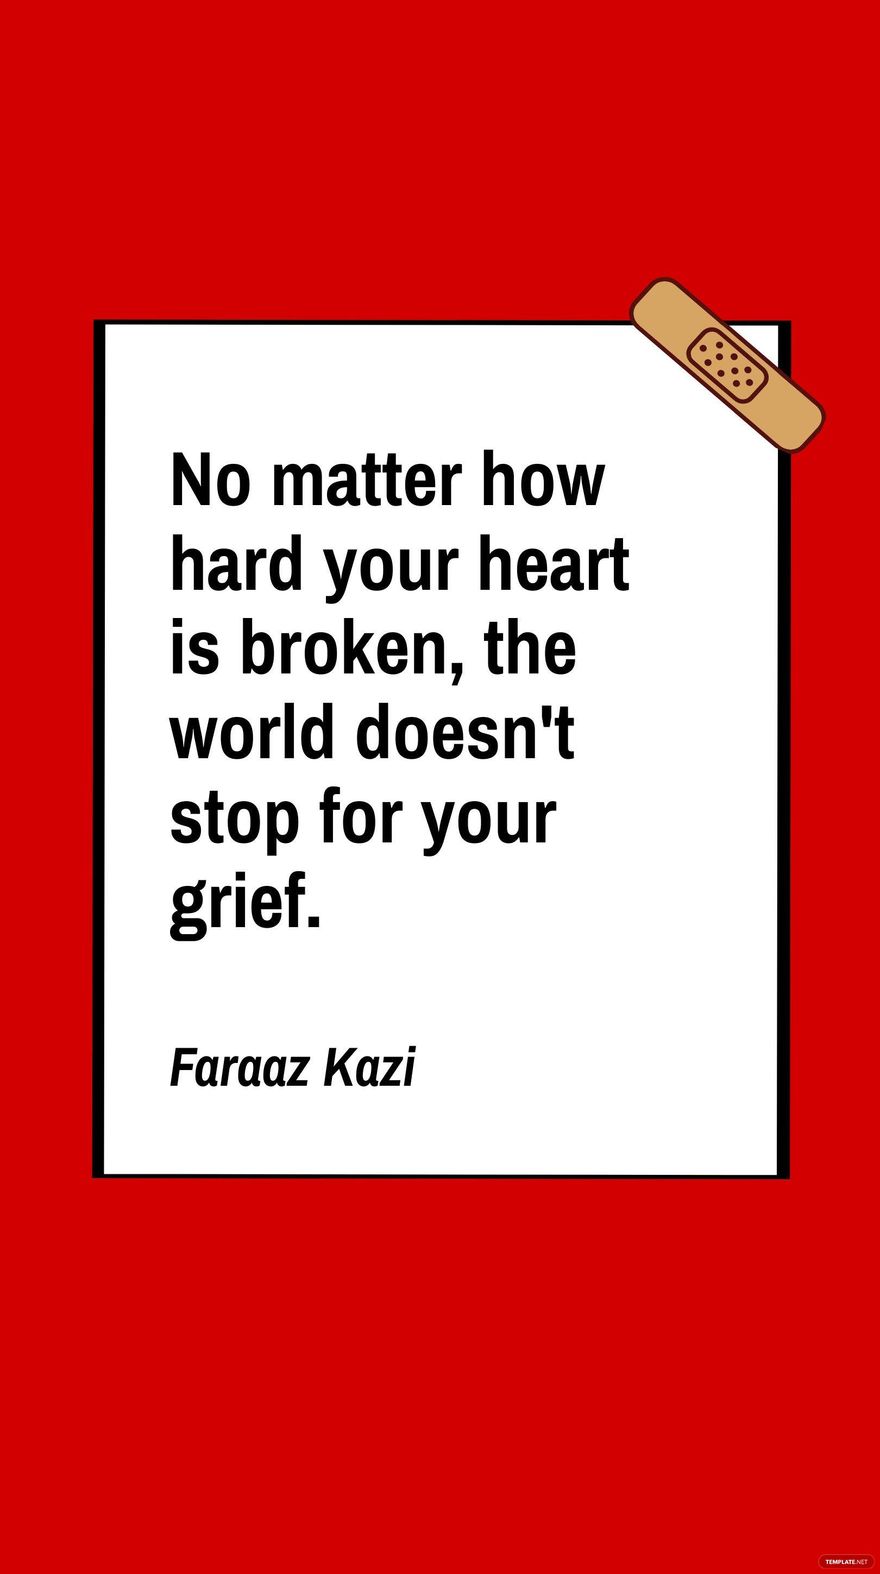 Free Faraaz Kazi - No matter how hard your heart is broken, the world doesn't stop for your grief. in JPG